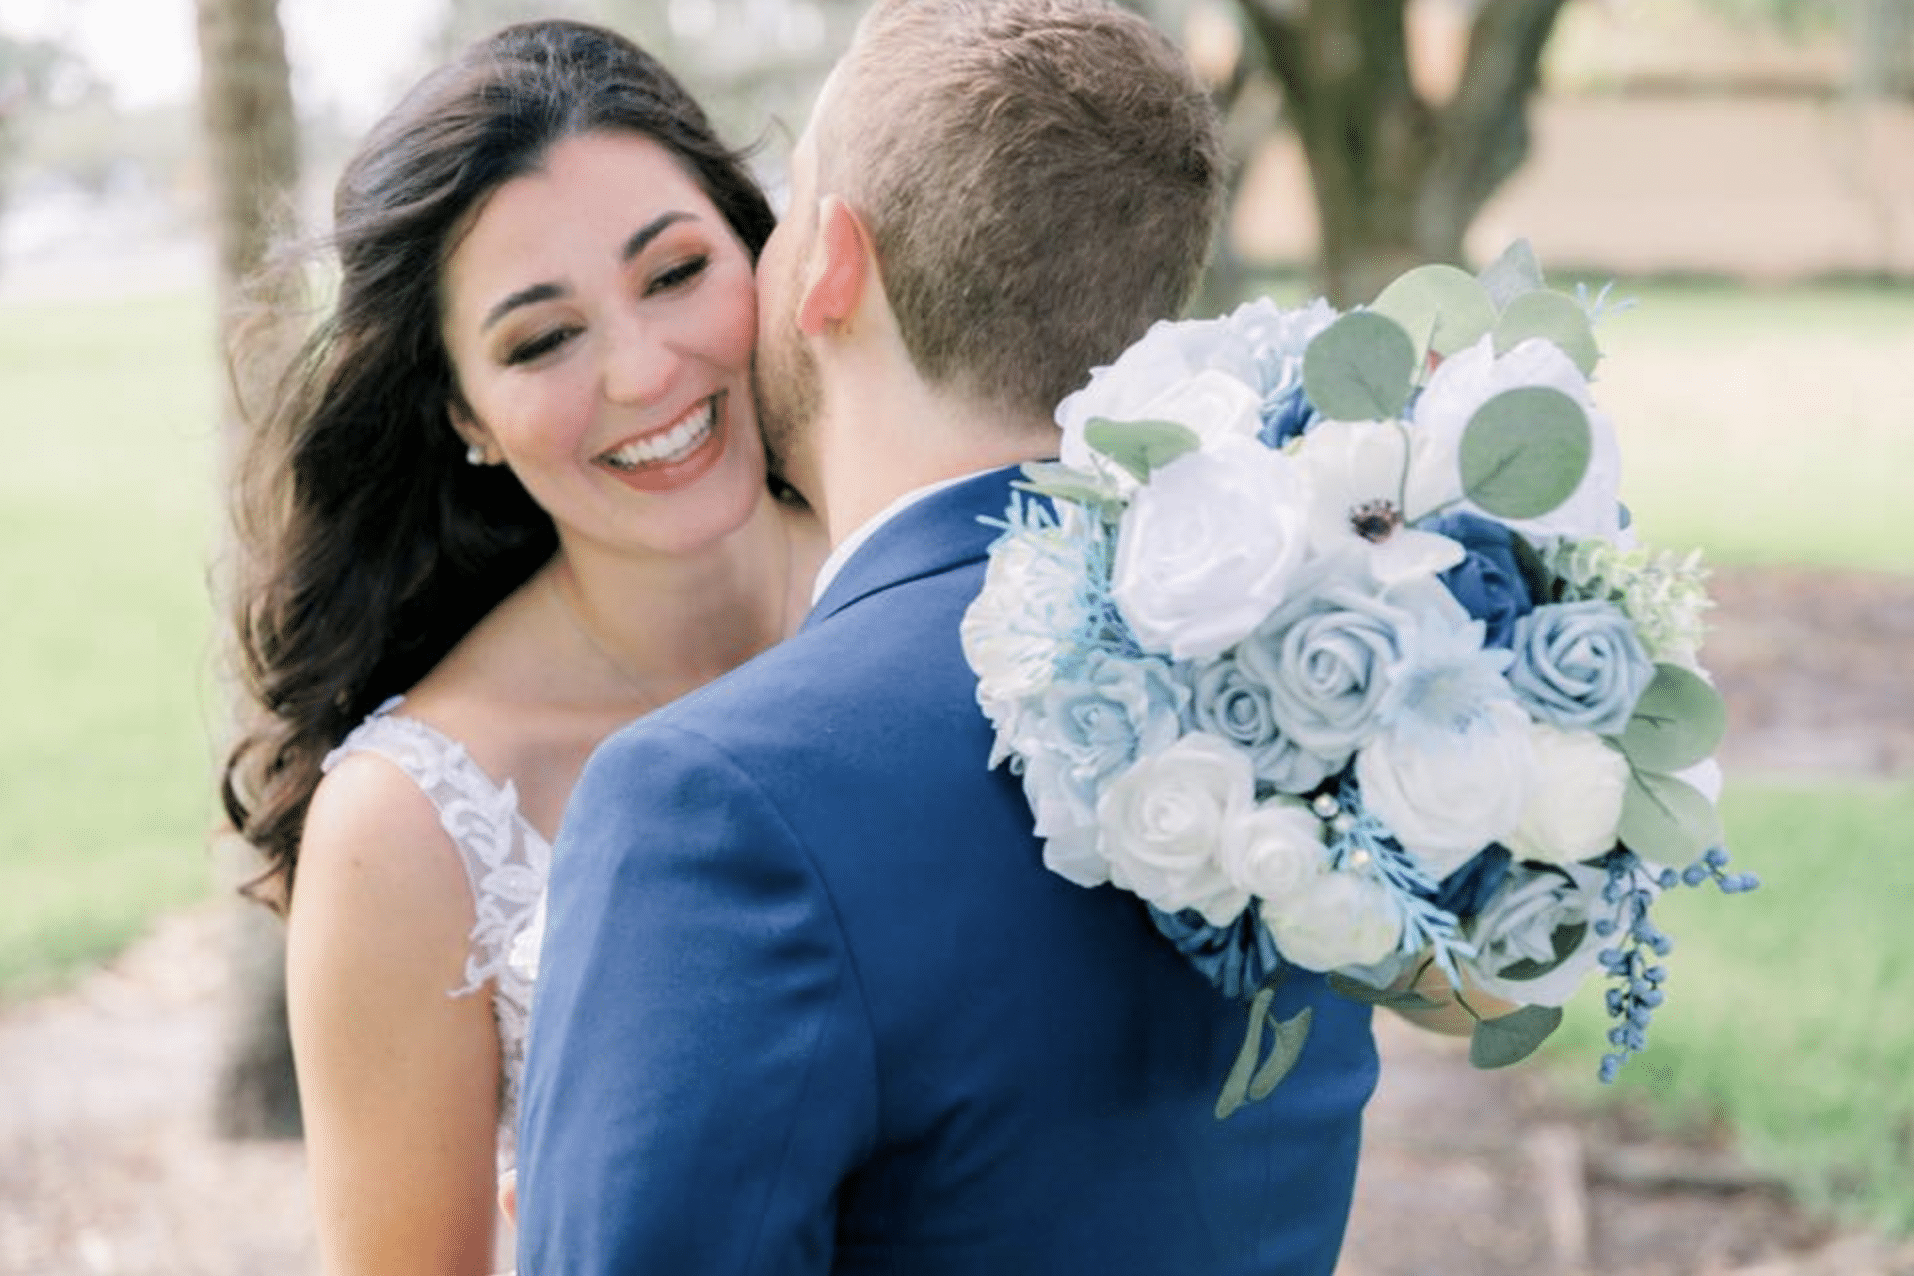 Bride and groom embracing after getting married. She is holding her sage and white color flowers